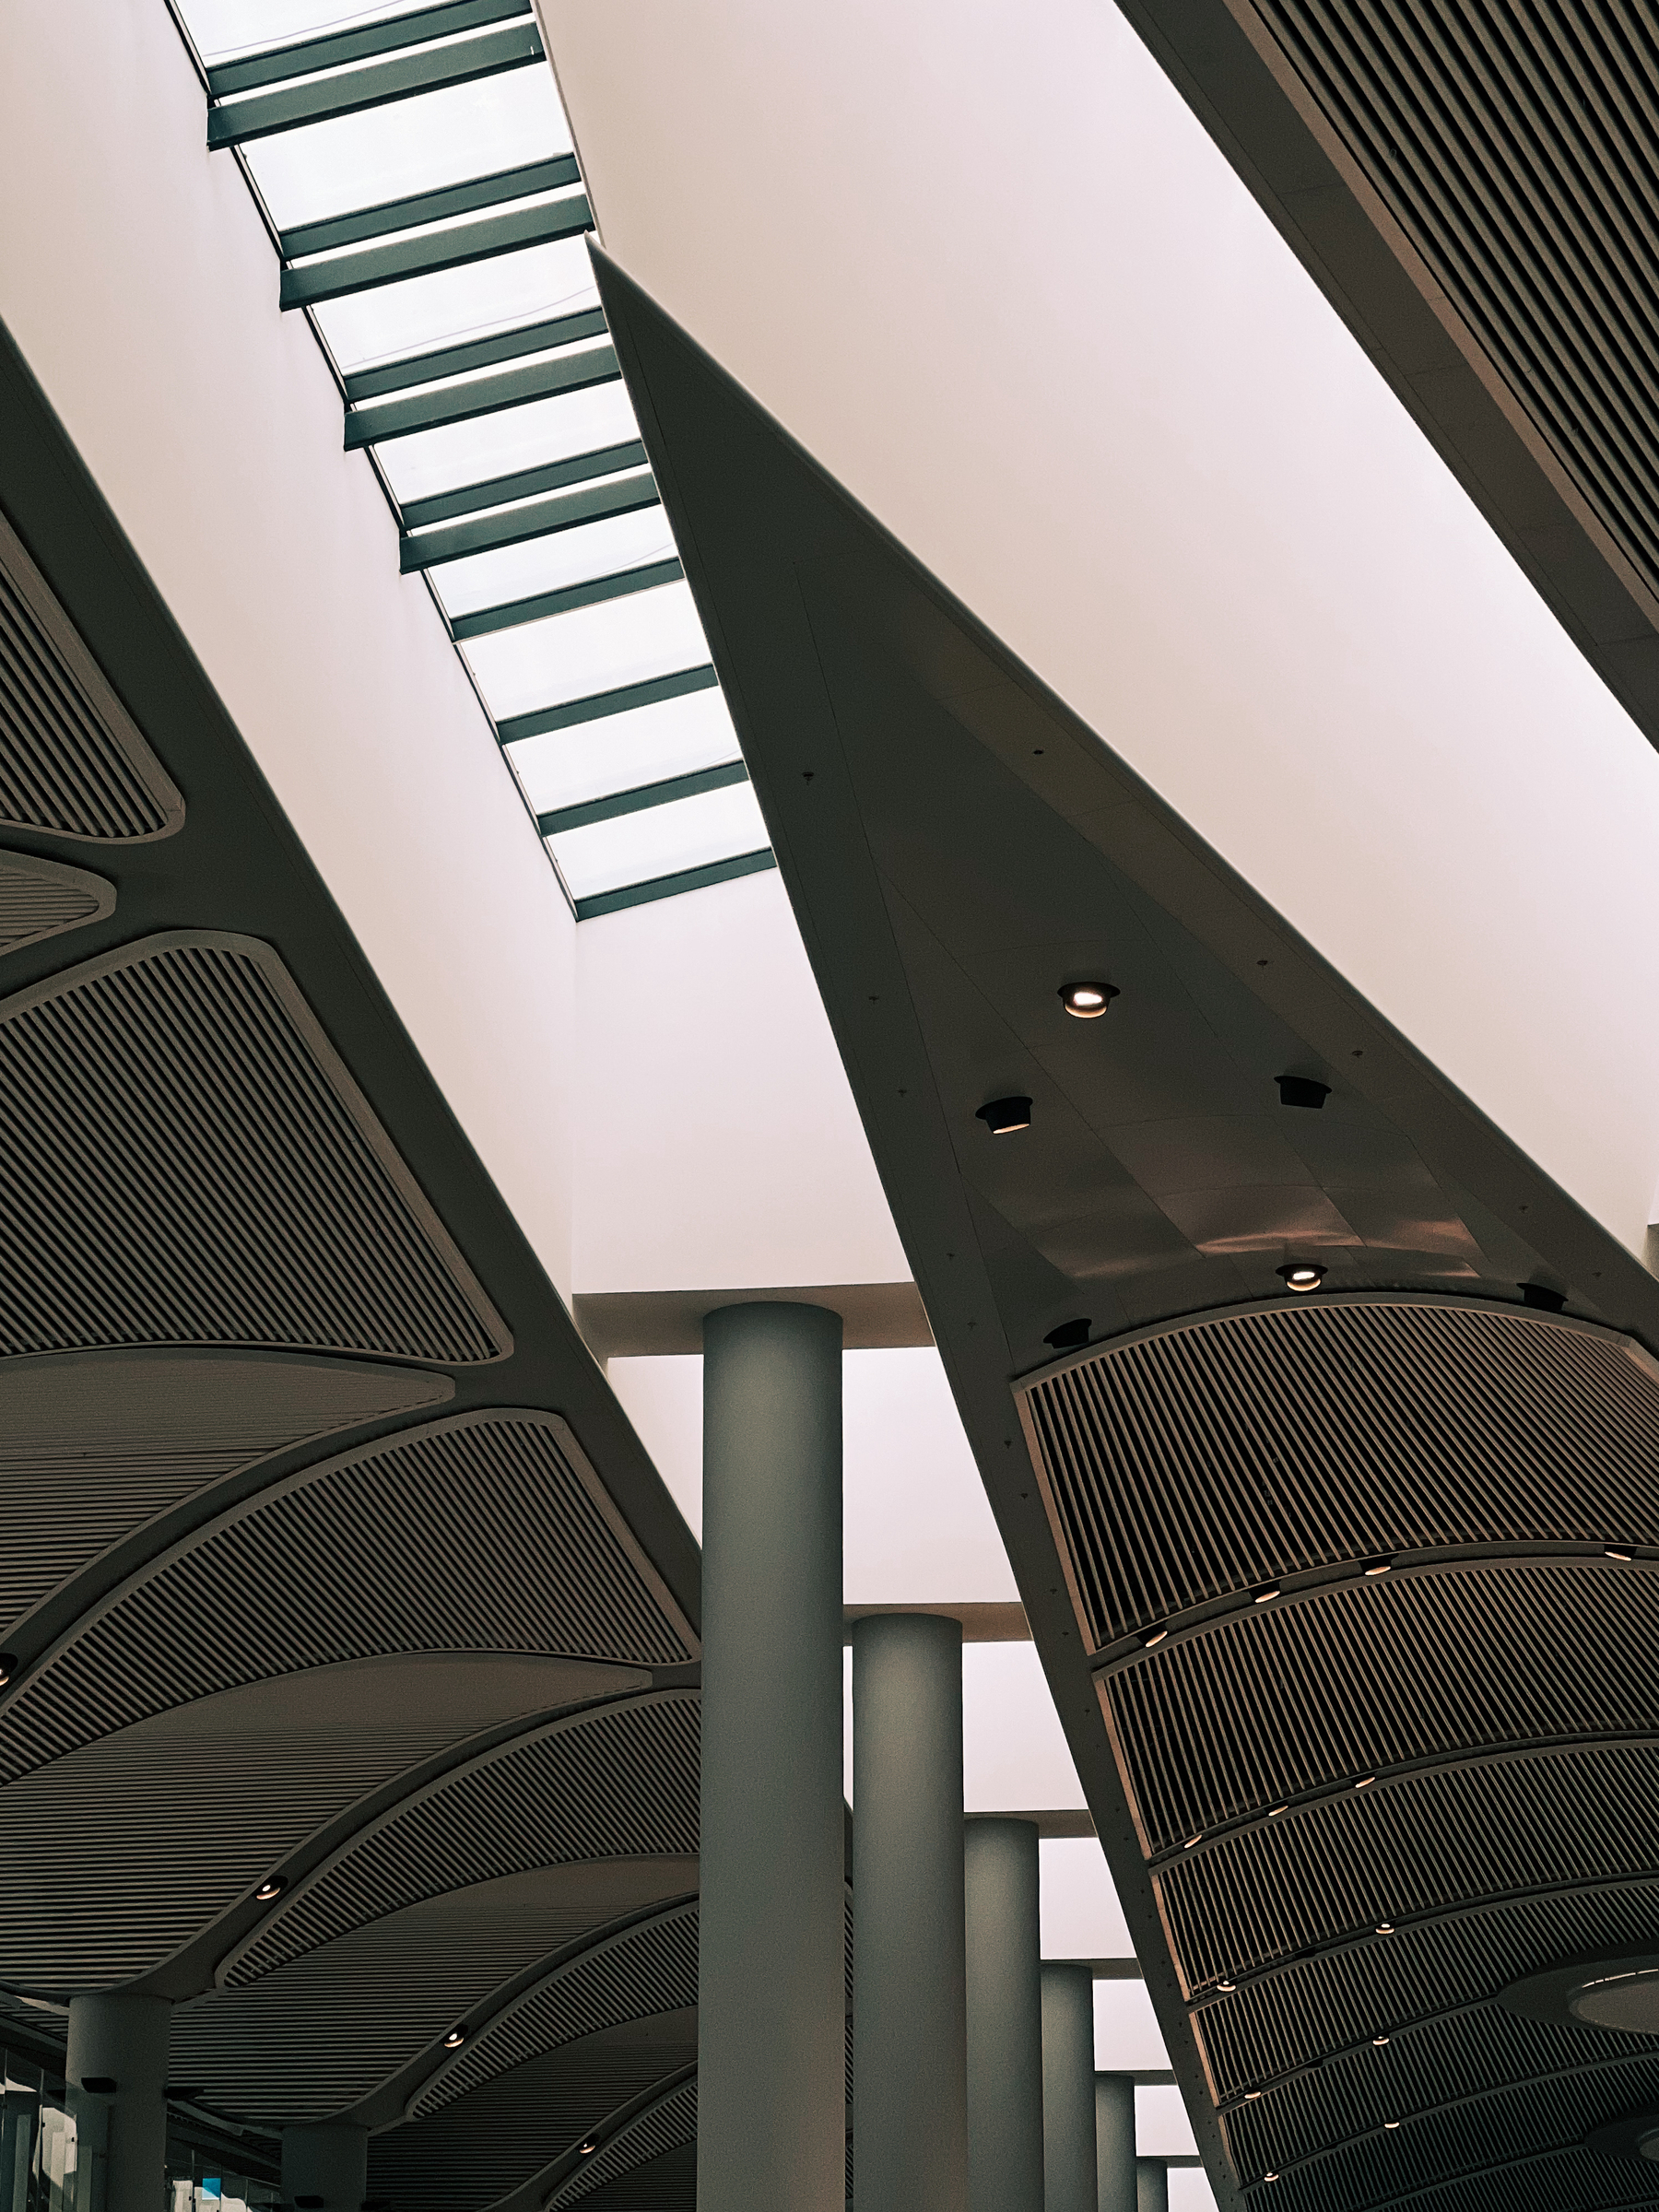 Interior architecture featuring a skylight, angled beams, cylindrical columns, and curved ceiling panels.